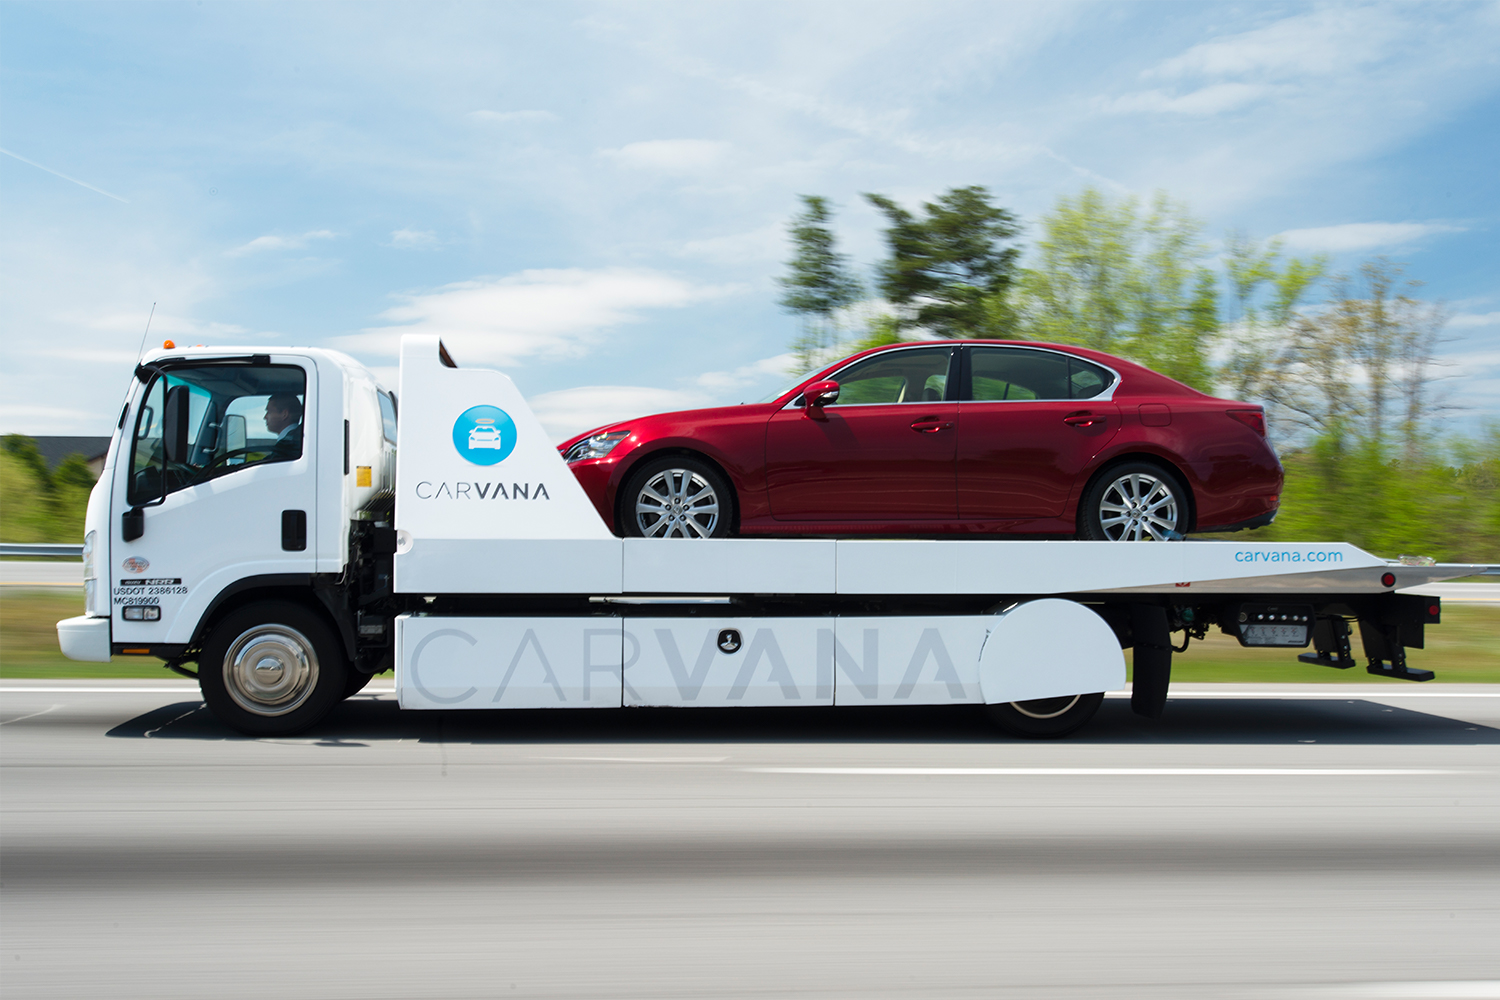 Red car on the back of a Carvana delivery vehicle